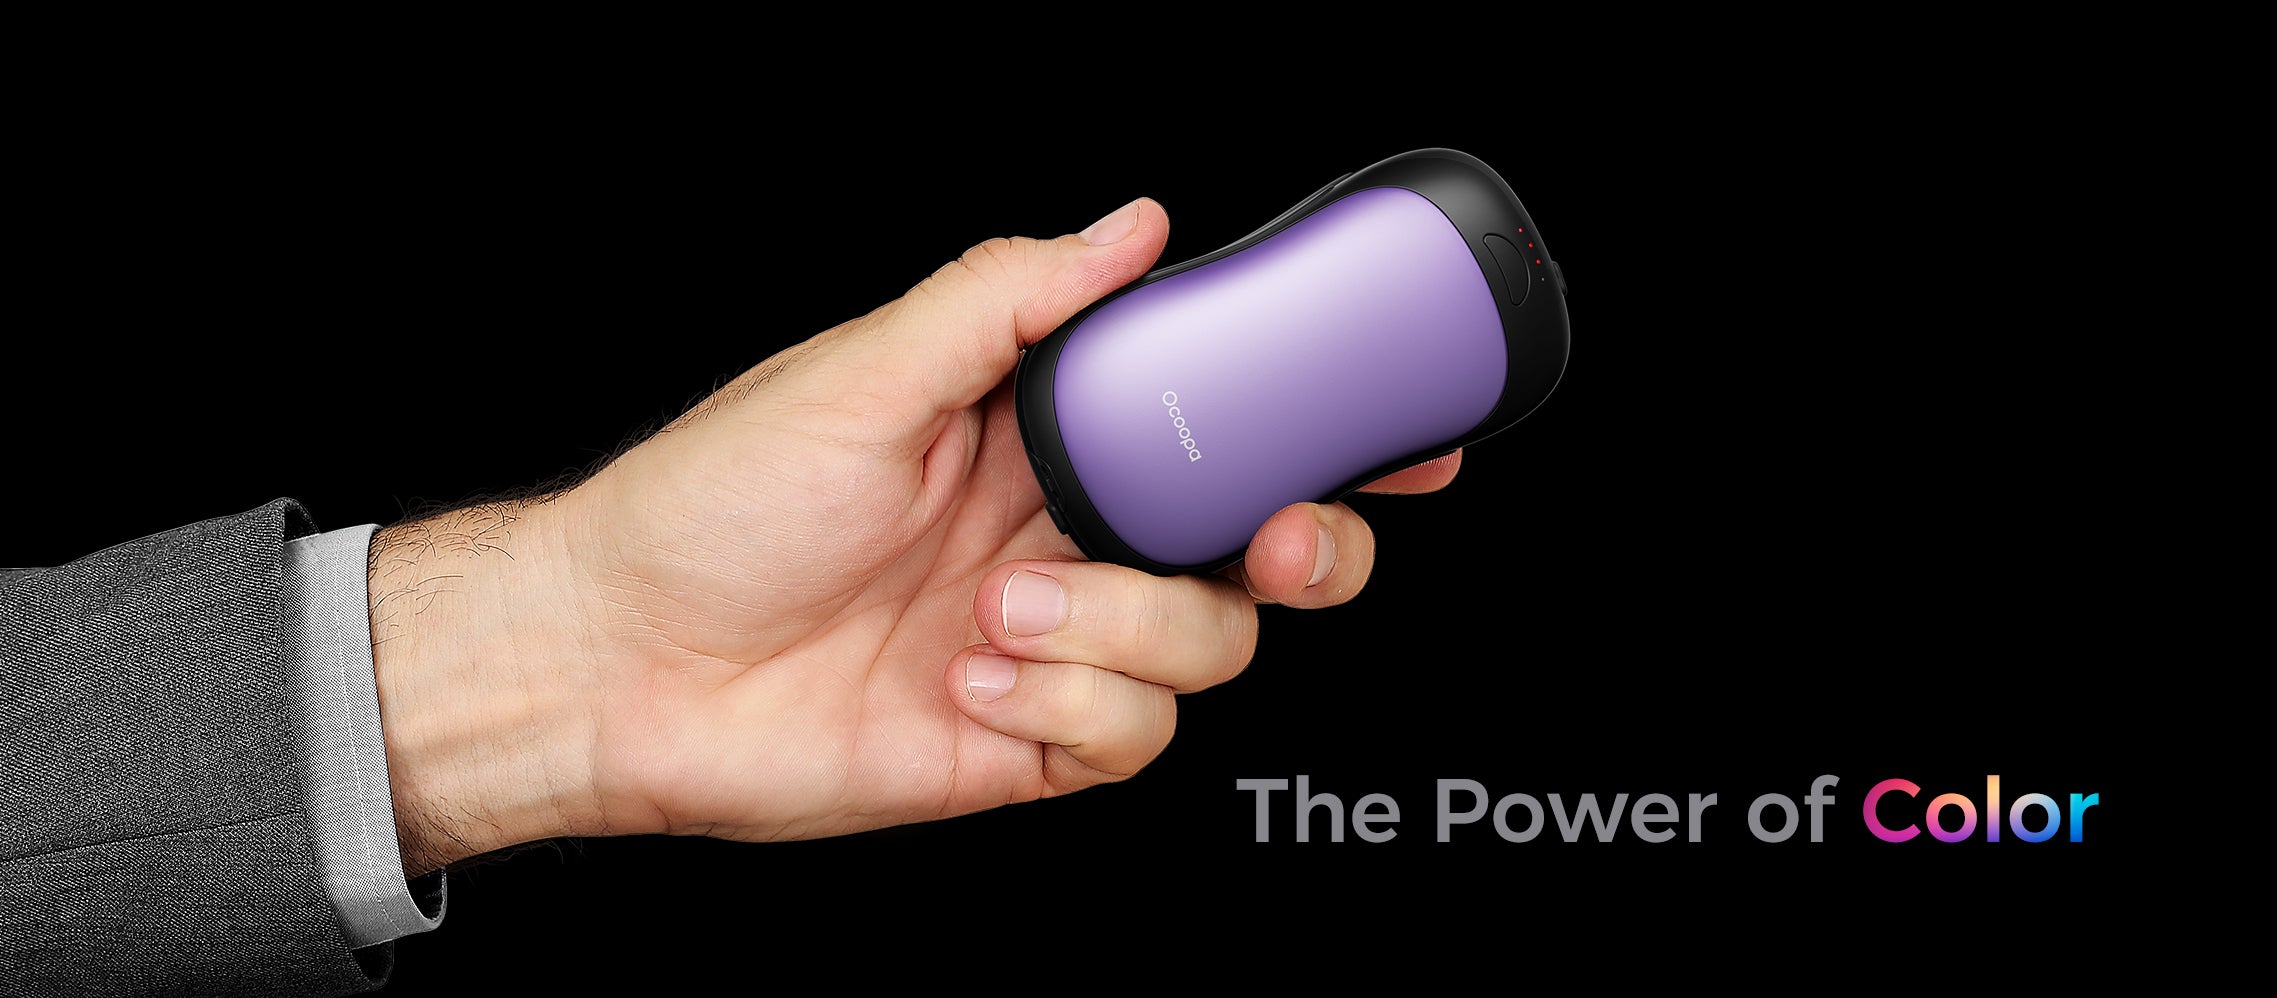 Ocoopa UT3 Pro Color Options - Explore Stylish Choices for Your Rechargeable Magnetic Hand Warmer -purle.